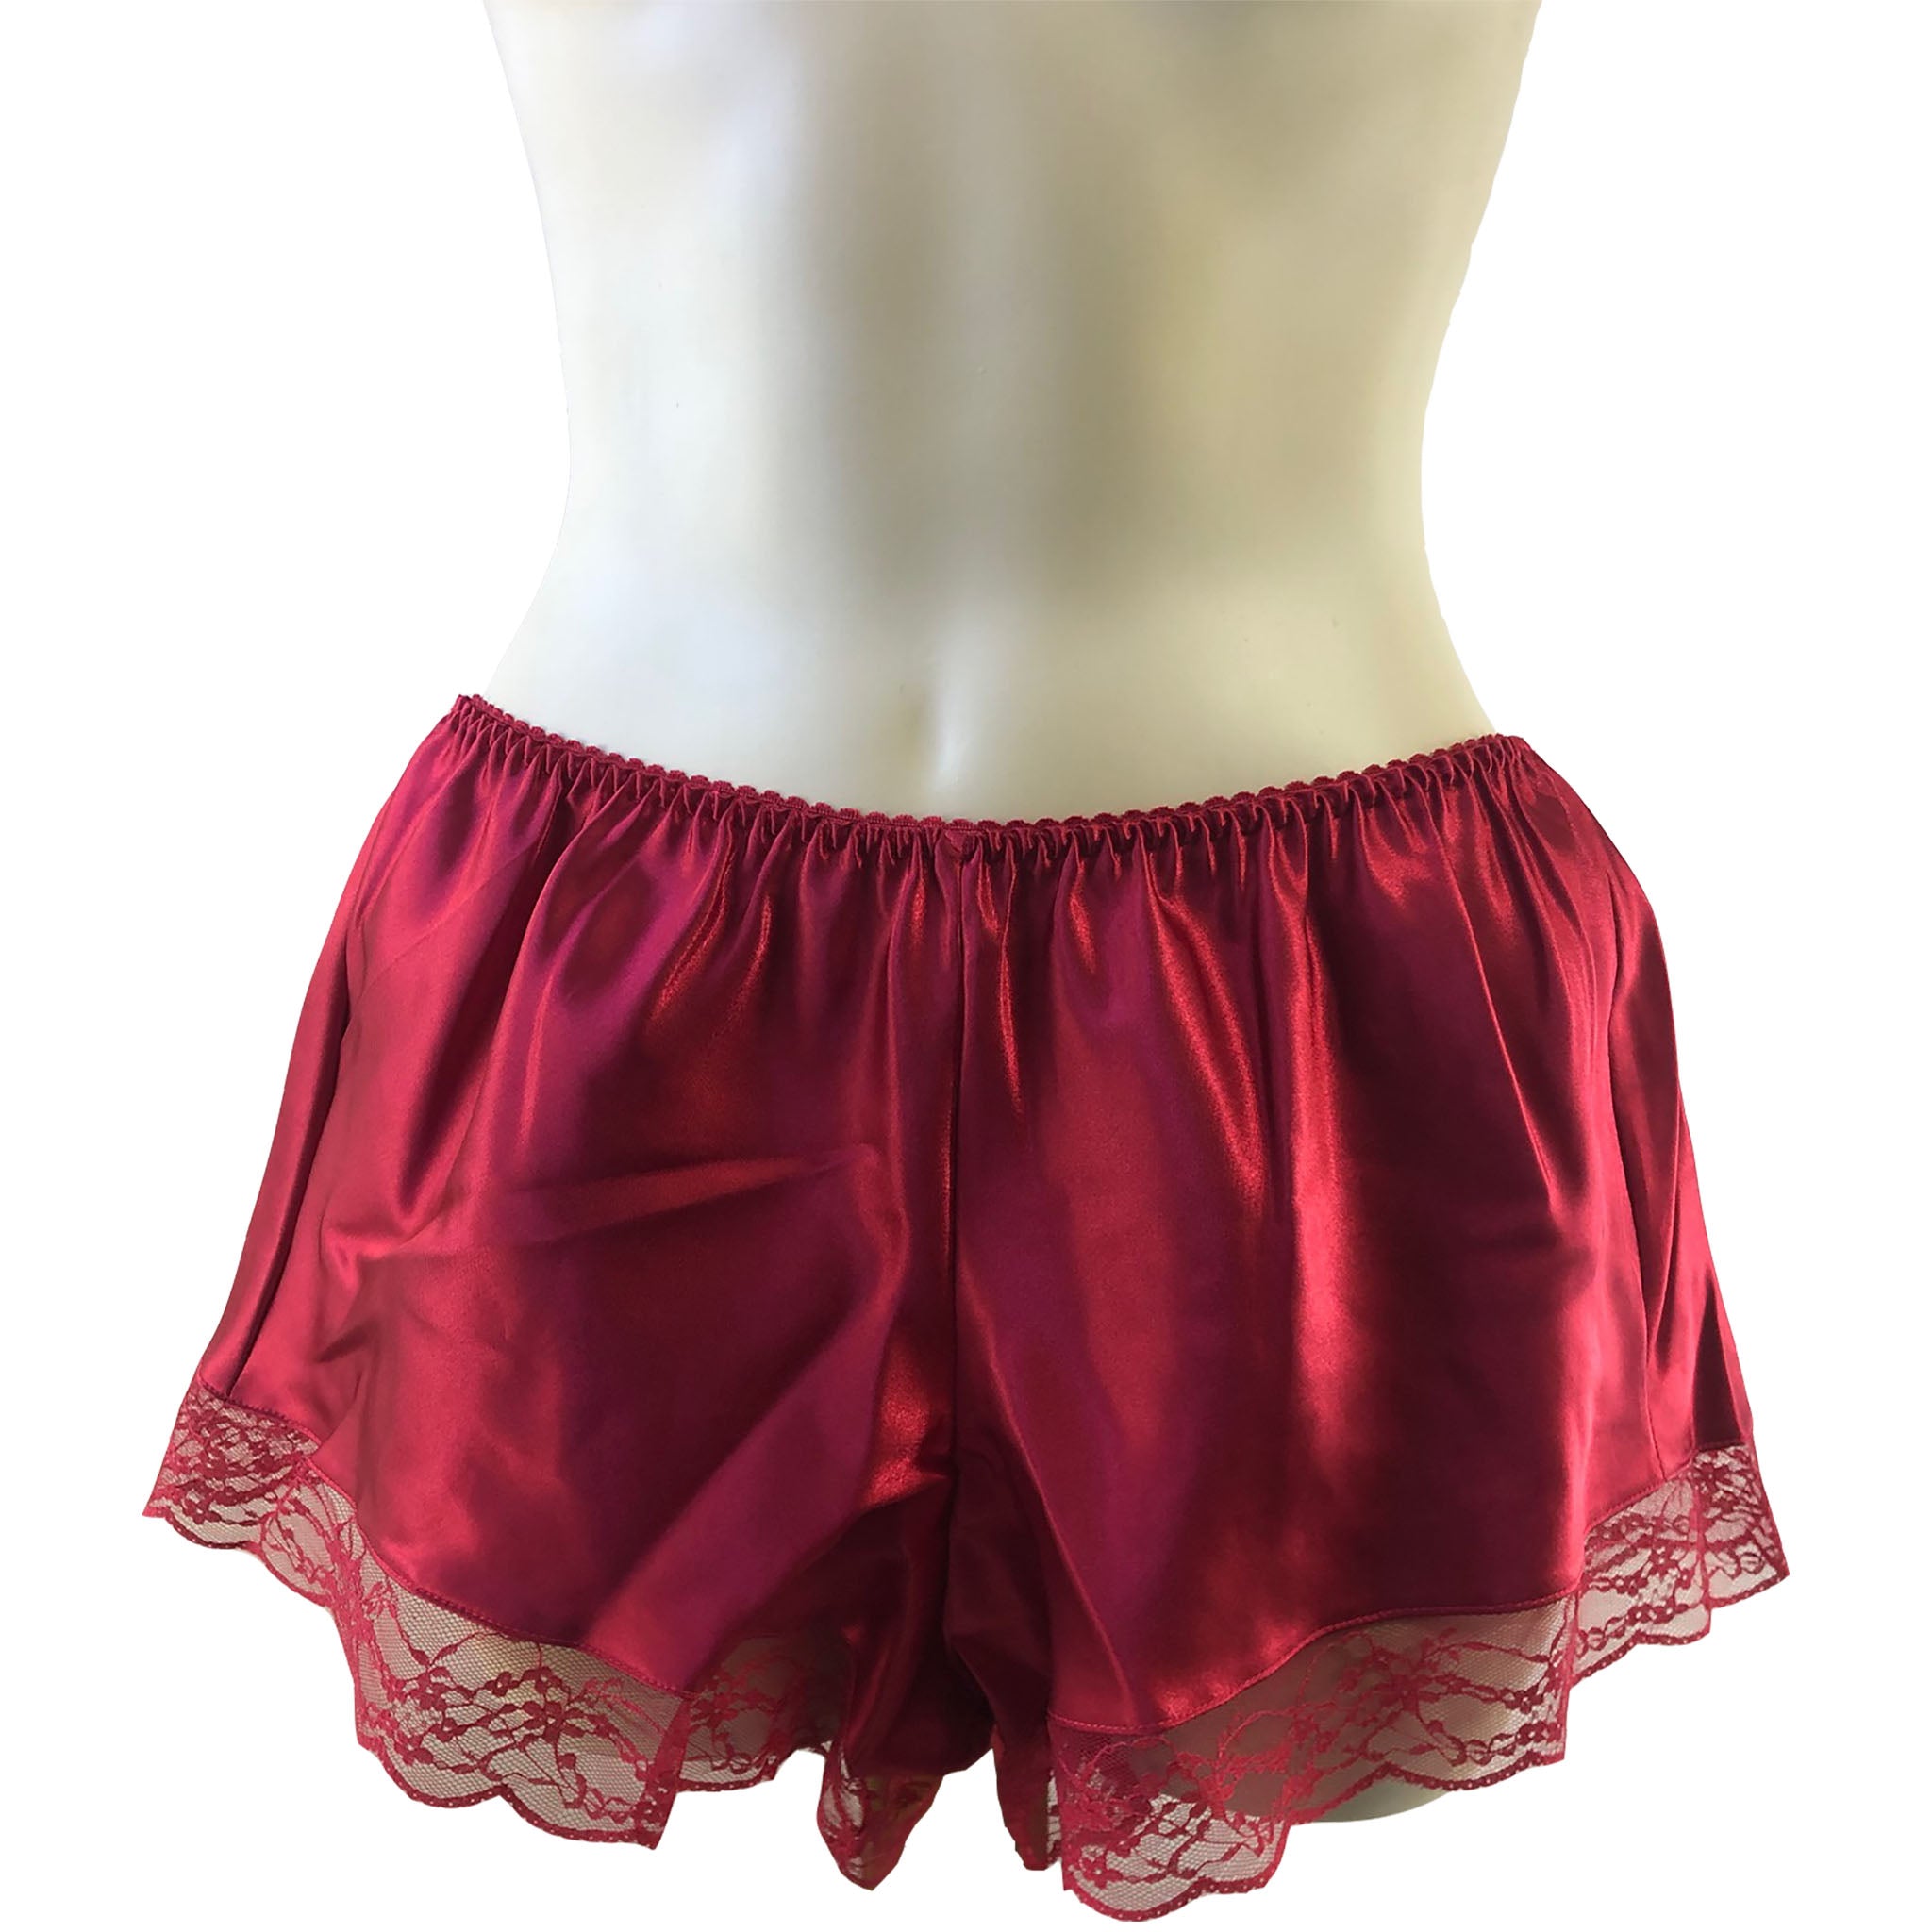 Red Sexy Satin Lace French Knickers Shorts Negligee Lingerie PLUS